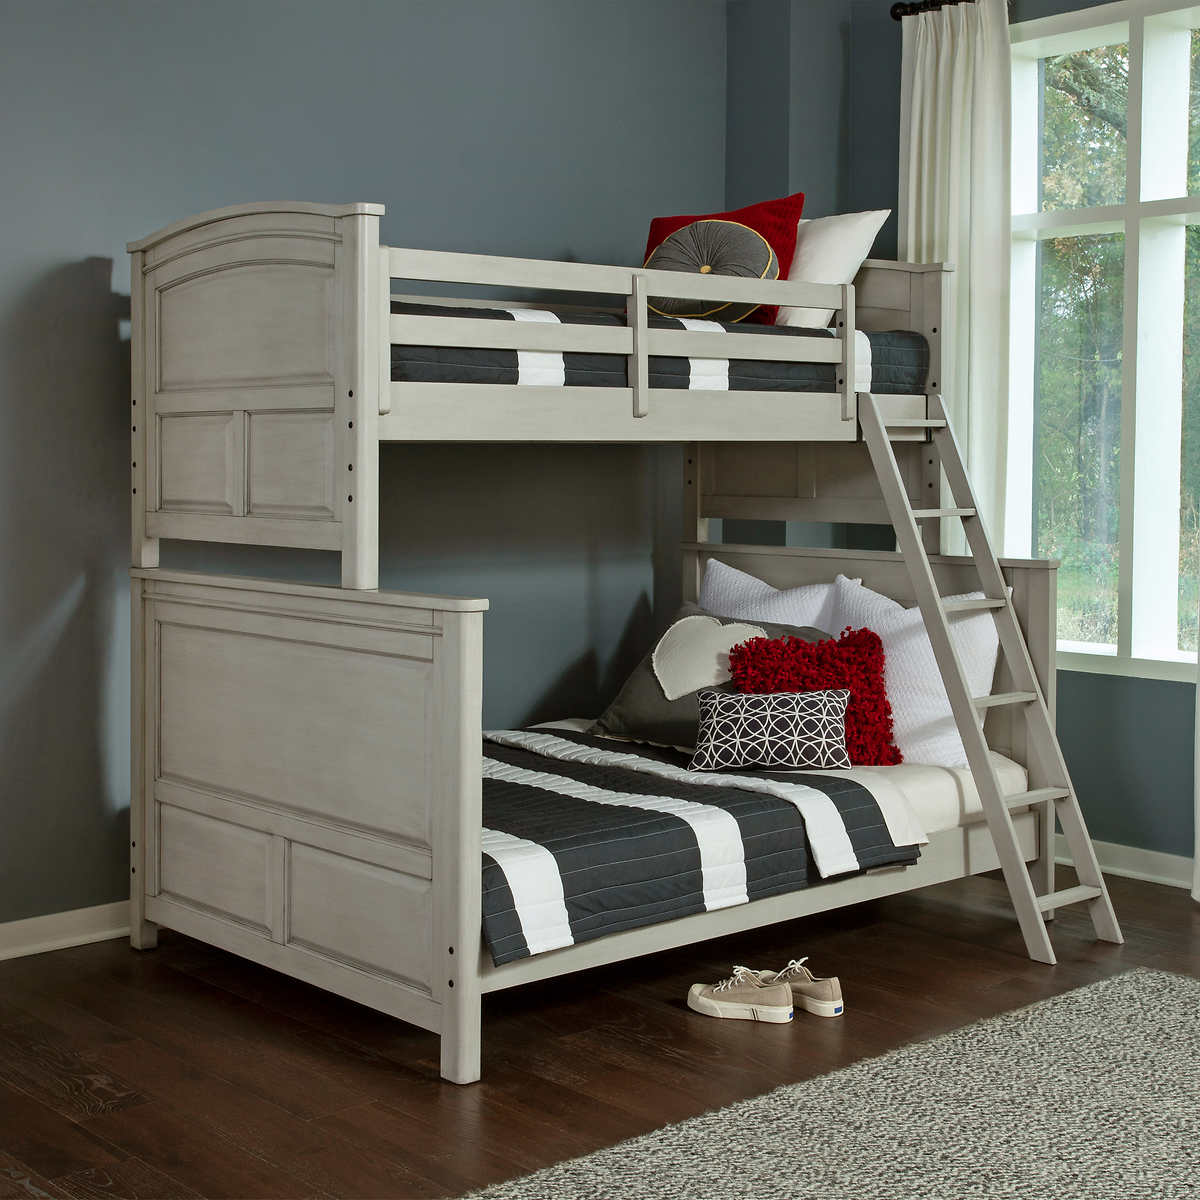 Wingate Twin Over Full Bunk Bed Costco, Slat Extra Long Twin Bunk Bed